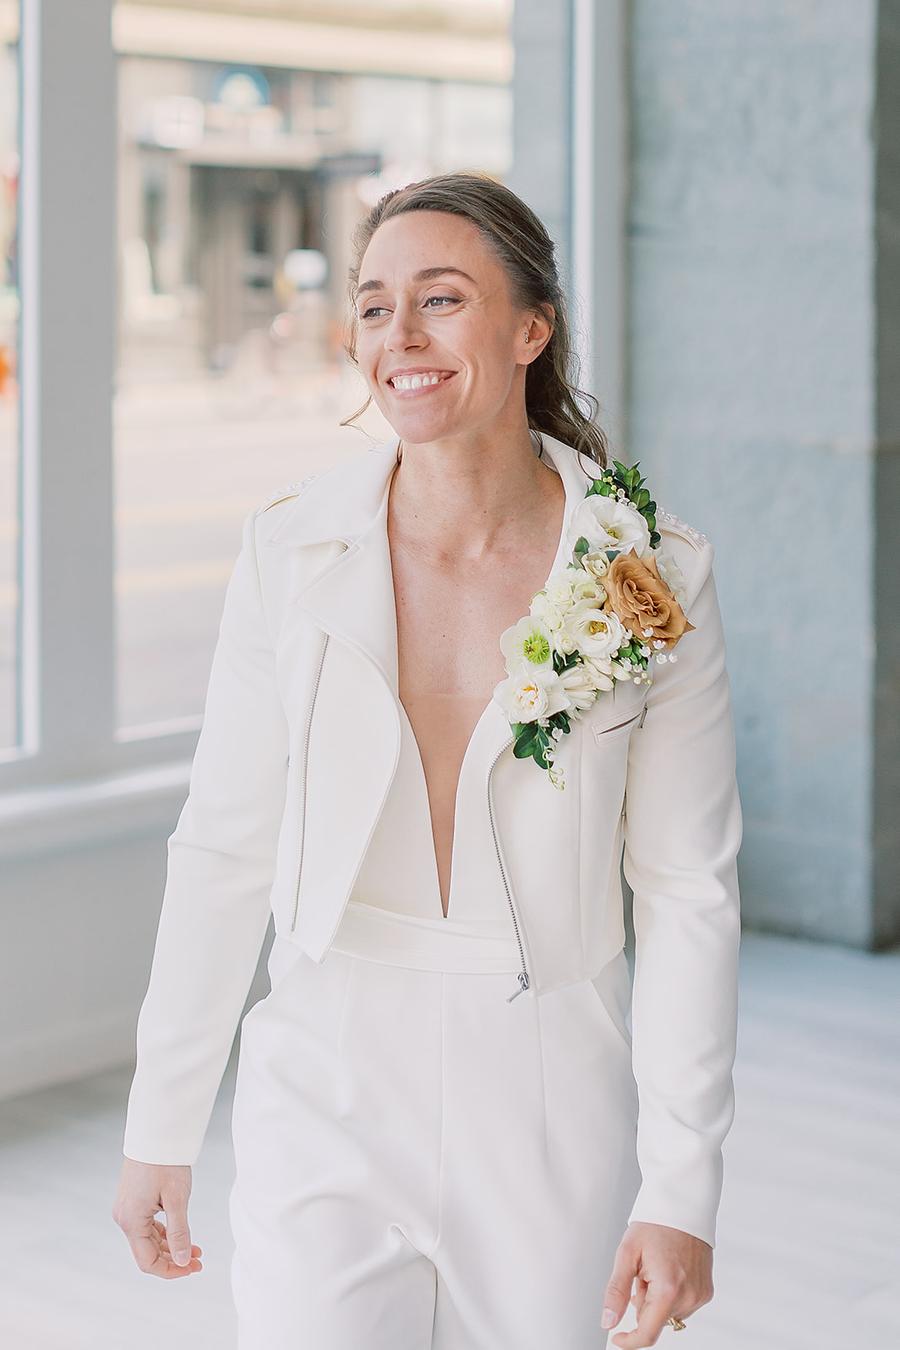 The second bride was wearing a more rock look with a white jumpsuit, a white moto jacket and a lush floral boutonniere